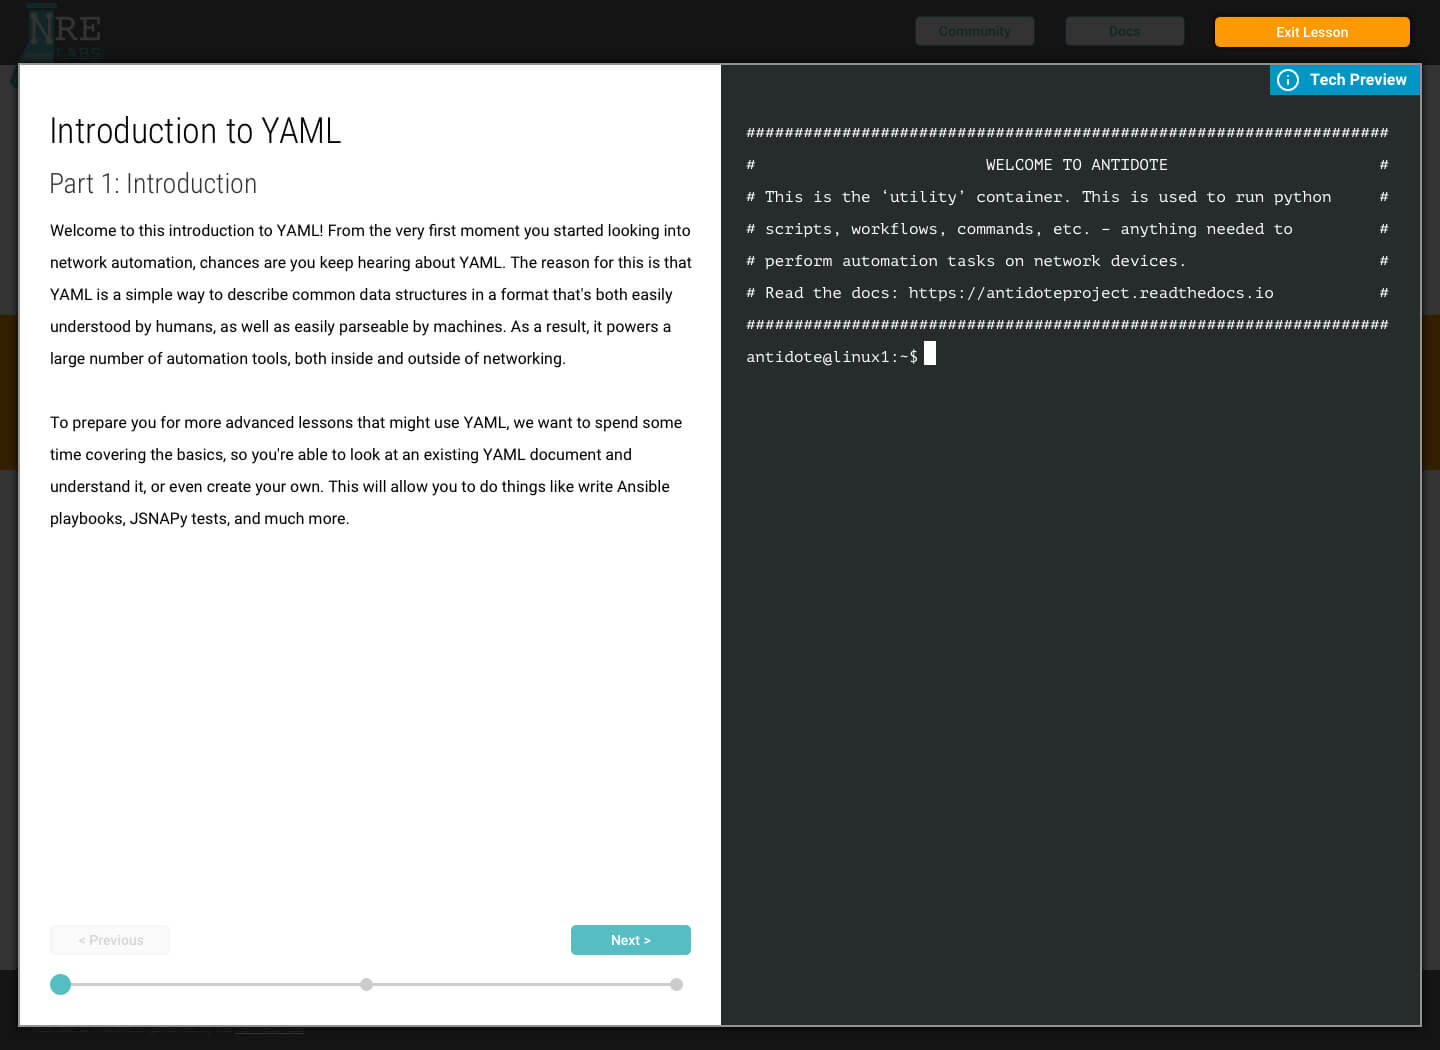 Part 1 of the Introduction to YAML online class